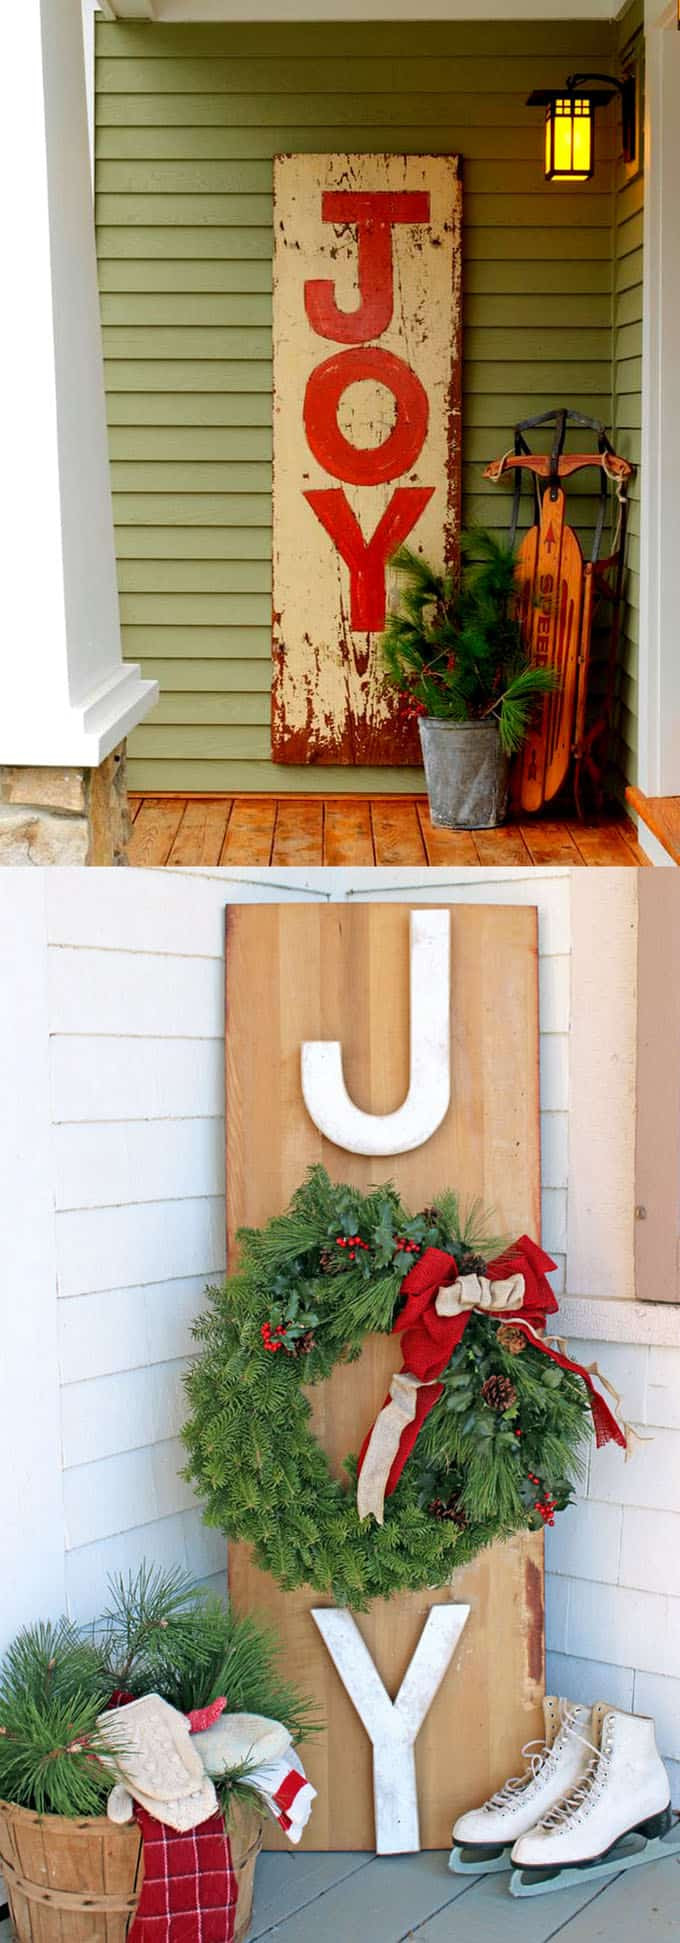 Christmas Outdoor Decorations Ideas
 Gorgeous Outdoor Christmas Decorations 32 Best Ideas